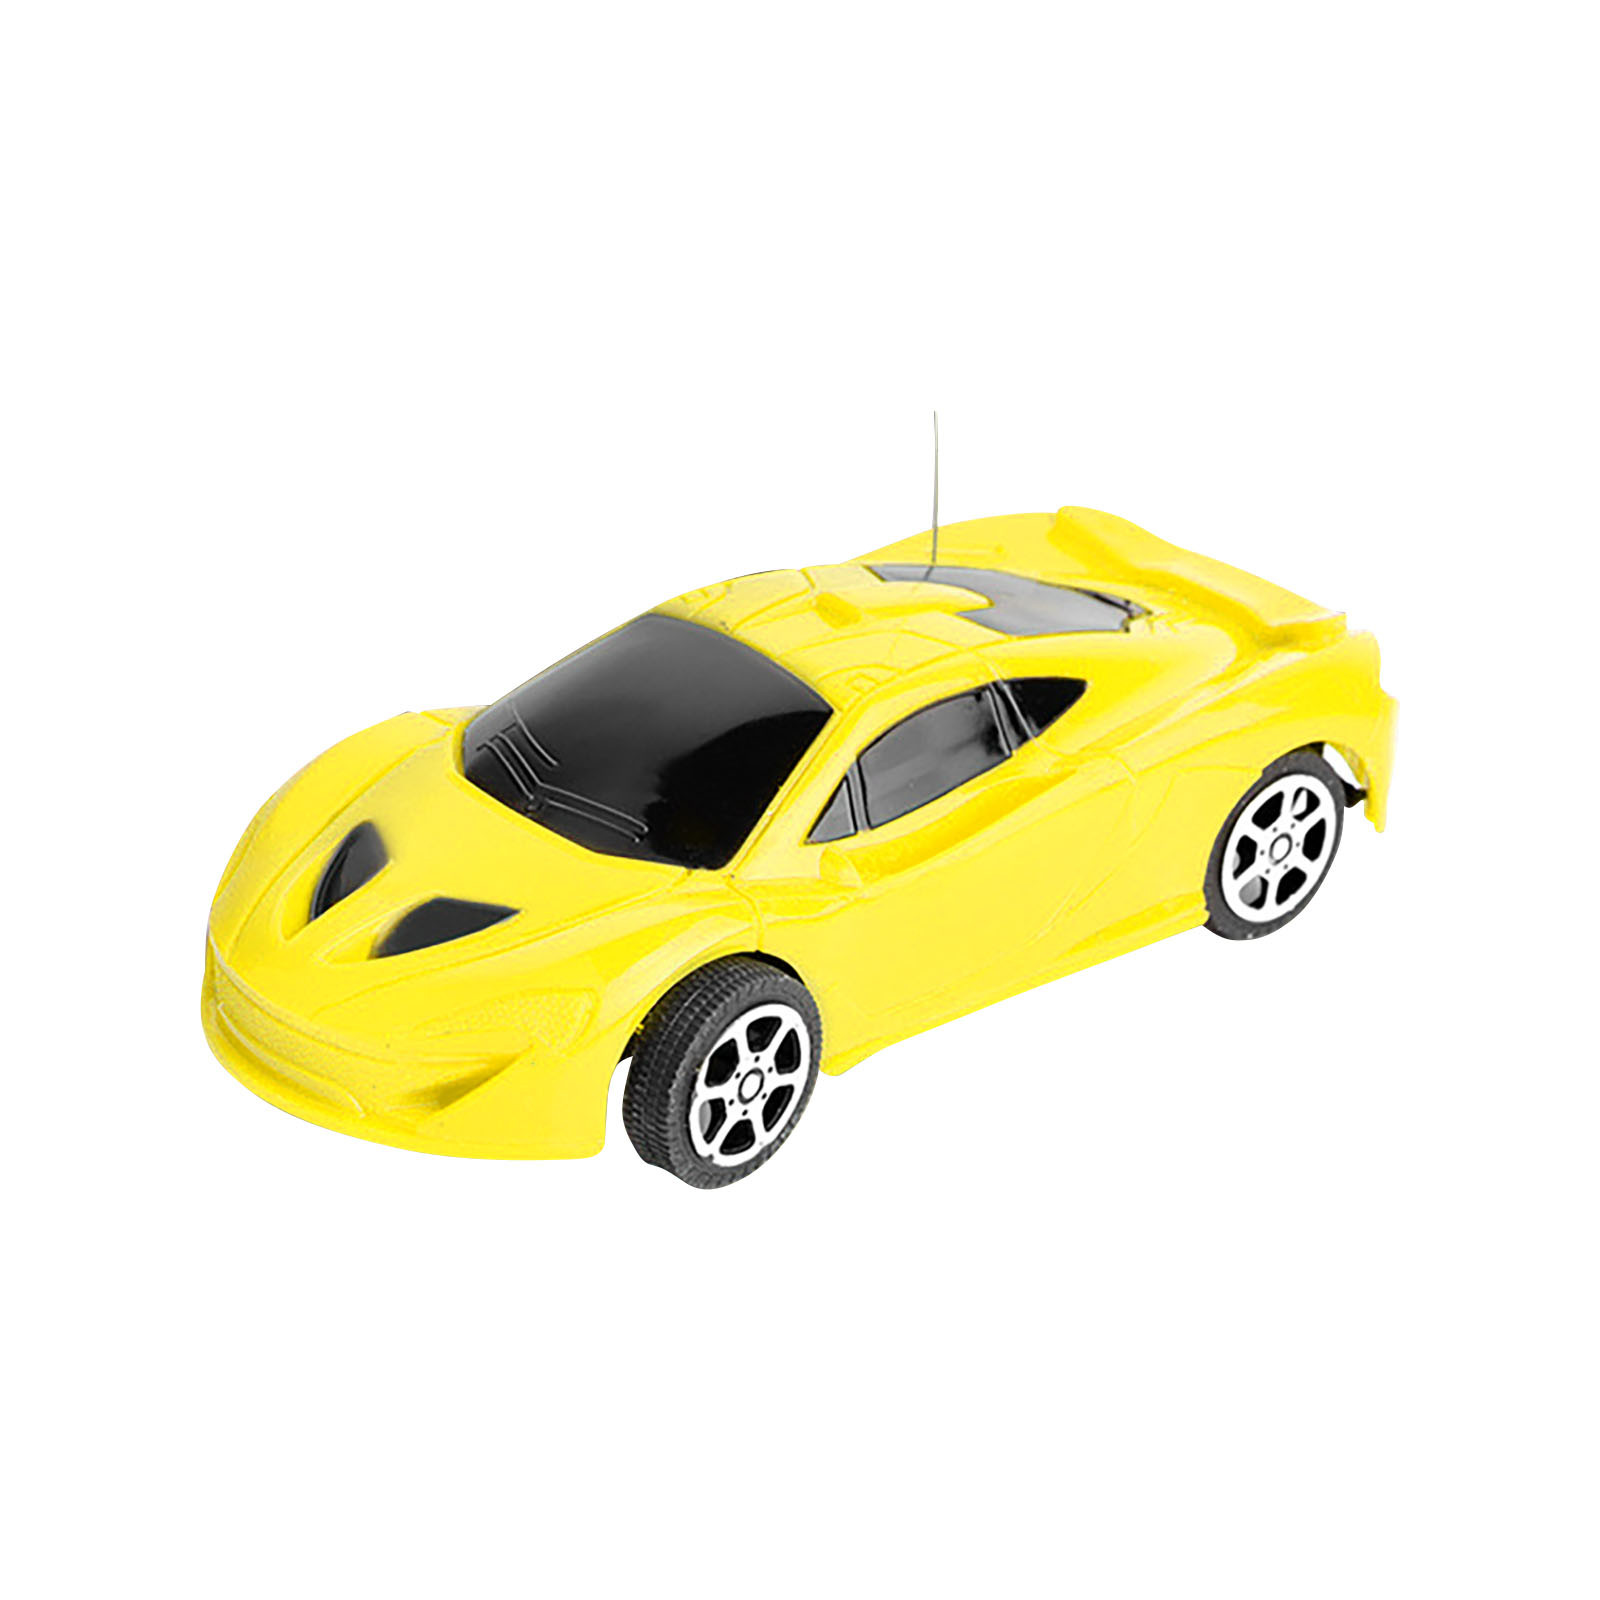 Elainilye Simulation Simulation Model Toy 1: 24 Electric Two Way Remote Control Vehicle Simulation Car Model Children Toy Car - image 2 of 2